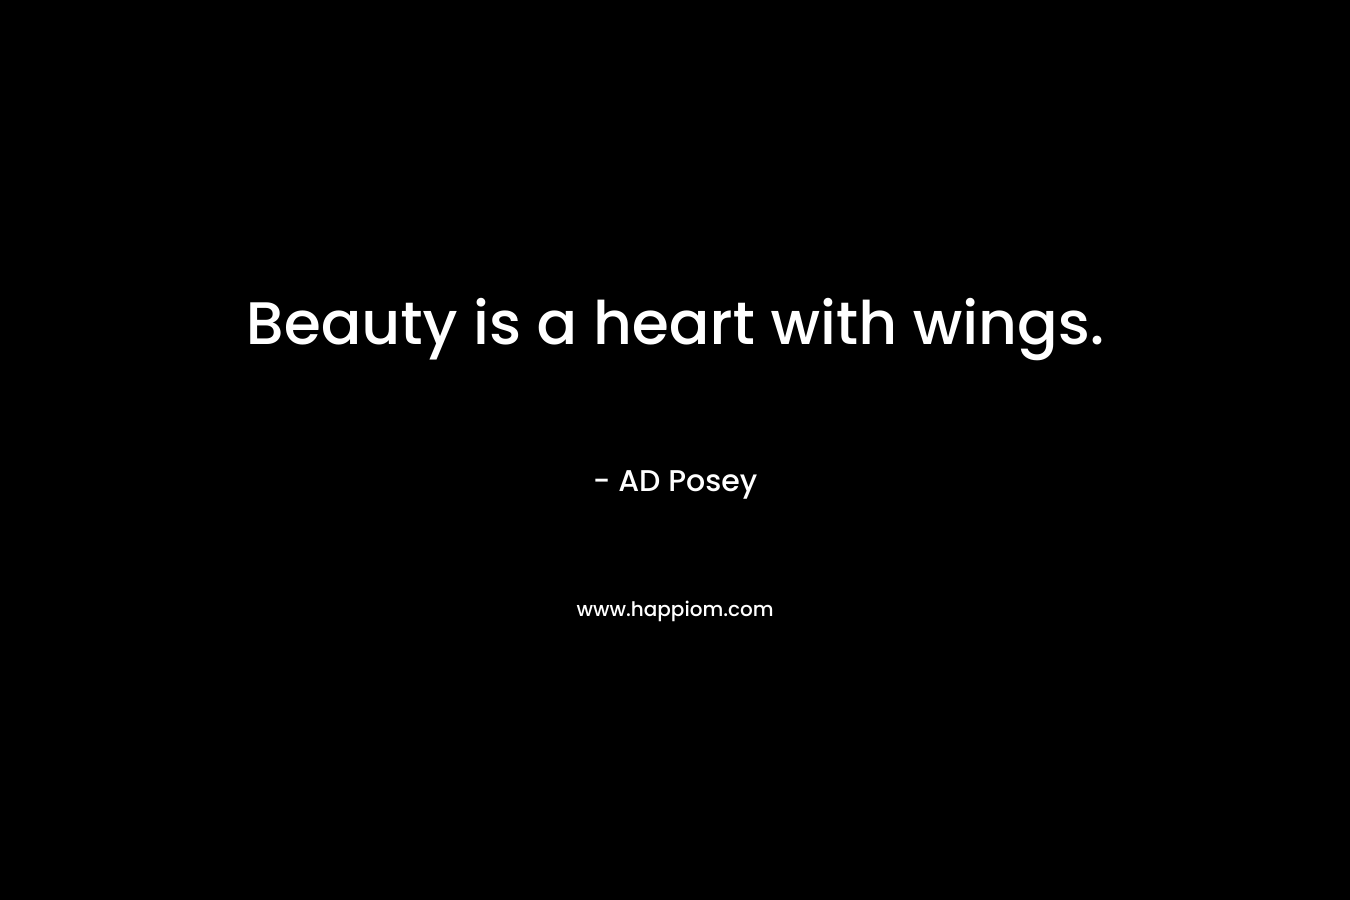 Beauty is a heart with wings.